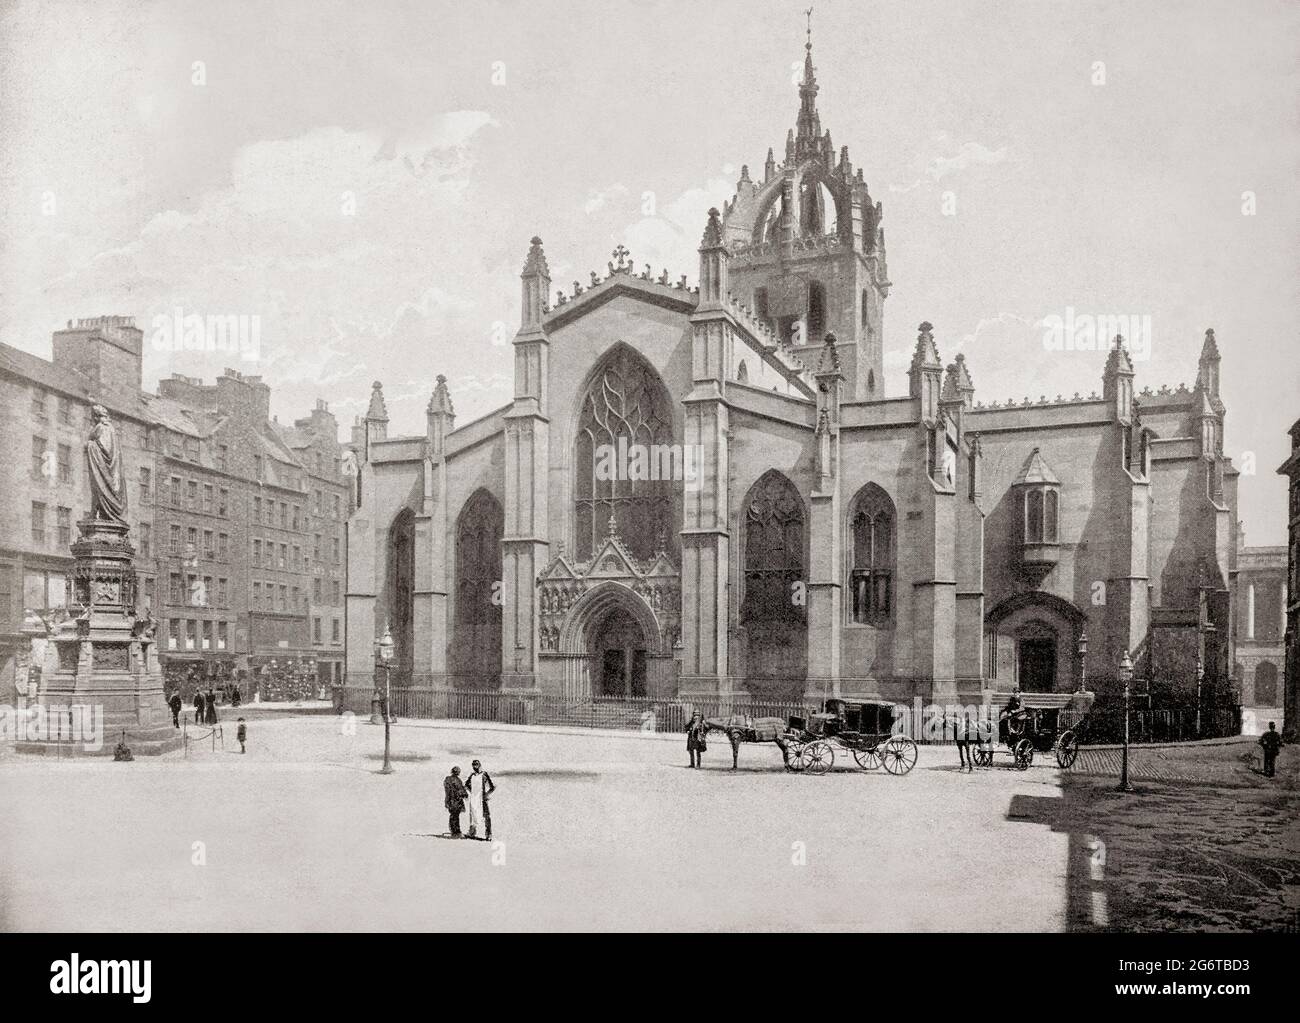 A late 19th century view of St Giles' Cathedral or High Kirk of Edinburgh, a parish church of the Church of Scotland in the Old Town of Edinburgh. The current building was begun in the 14th century and extended until the early 16th century; significant alterations were undertaken in the 19th and 20th centuries, including the addition of the Thistle Chapel. St Giles' is closely associated with many events and figures in Scottish history, including John Knox, who served as the church's minister after the Scottish Reformation. Stock Photo